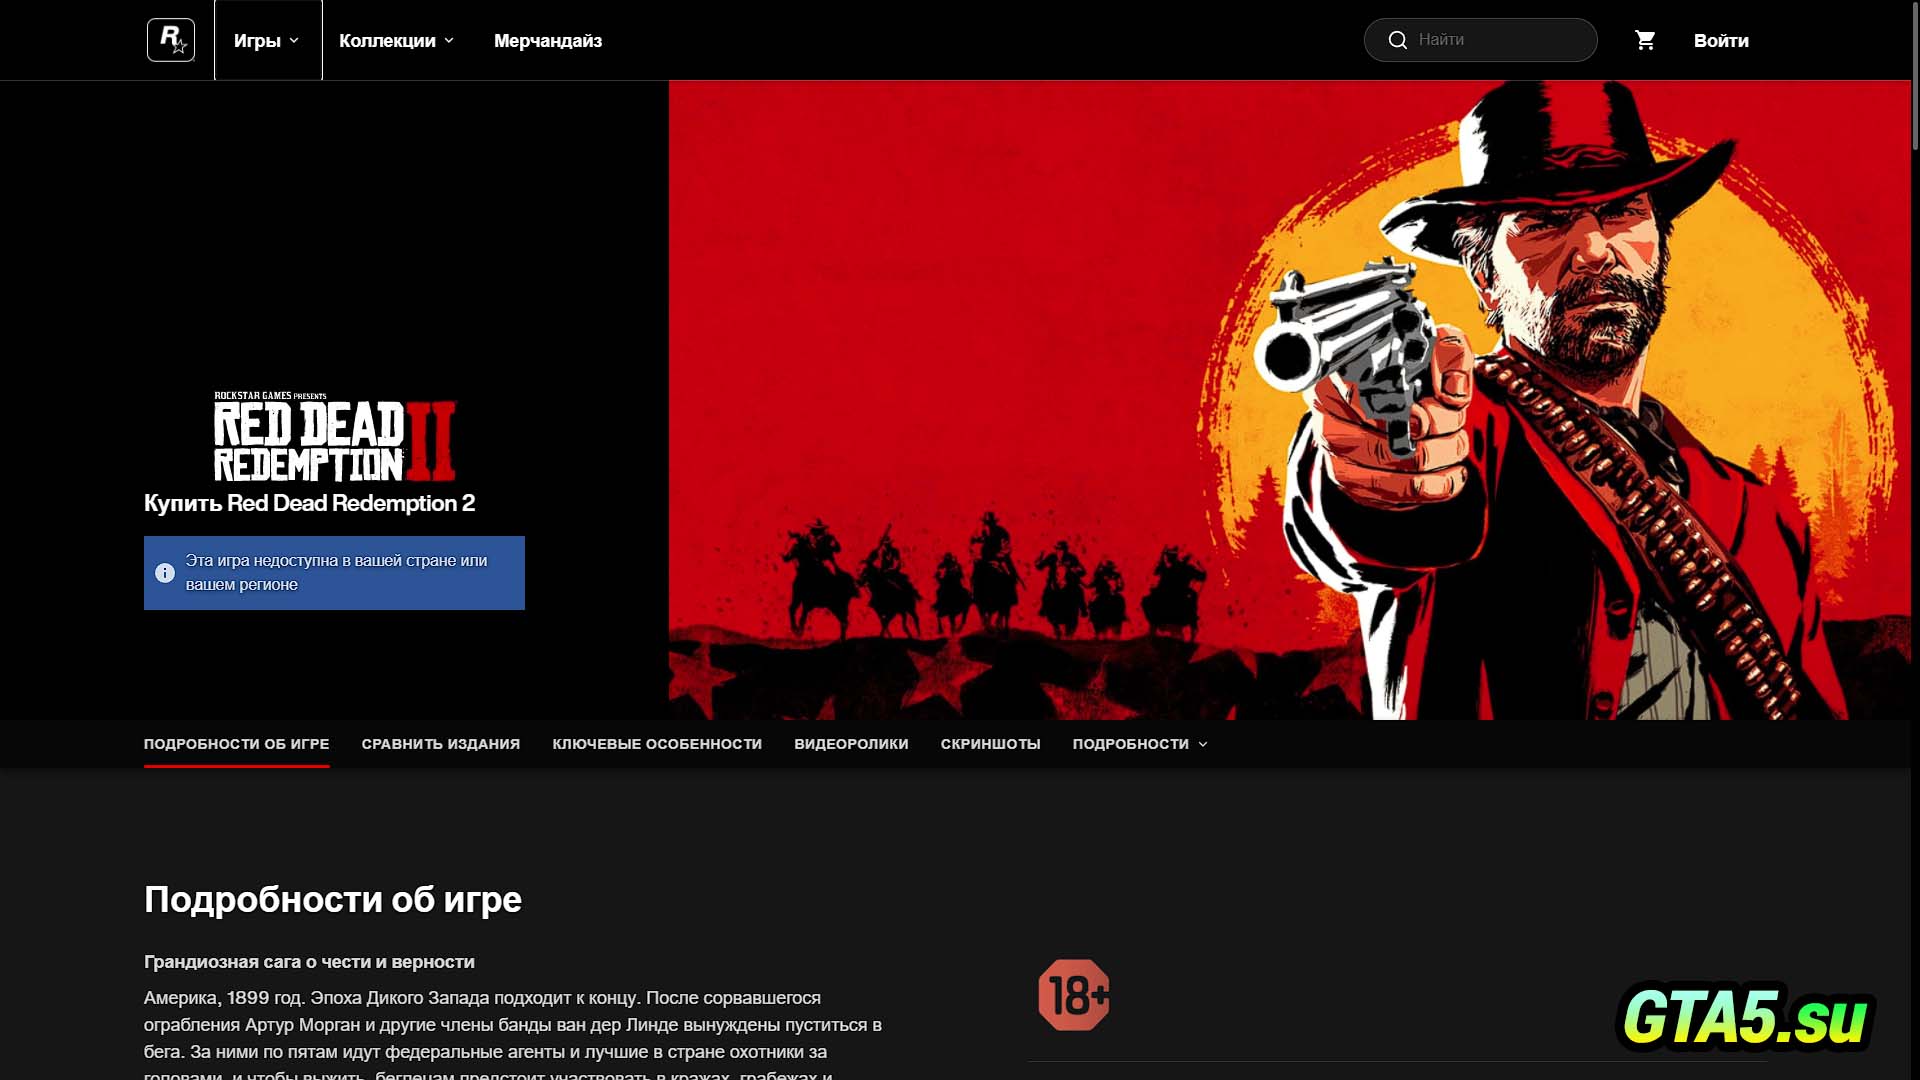 Error could not access game process shutdown rockstar games launcher and steam epic фото 49